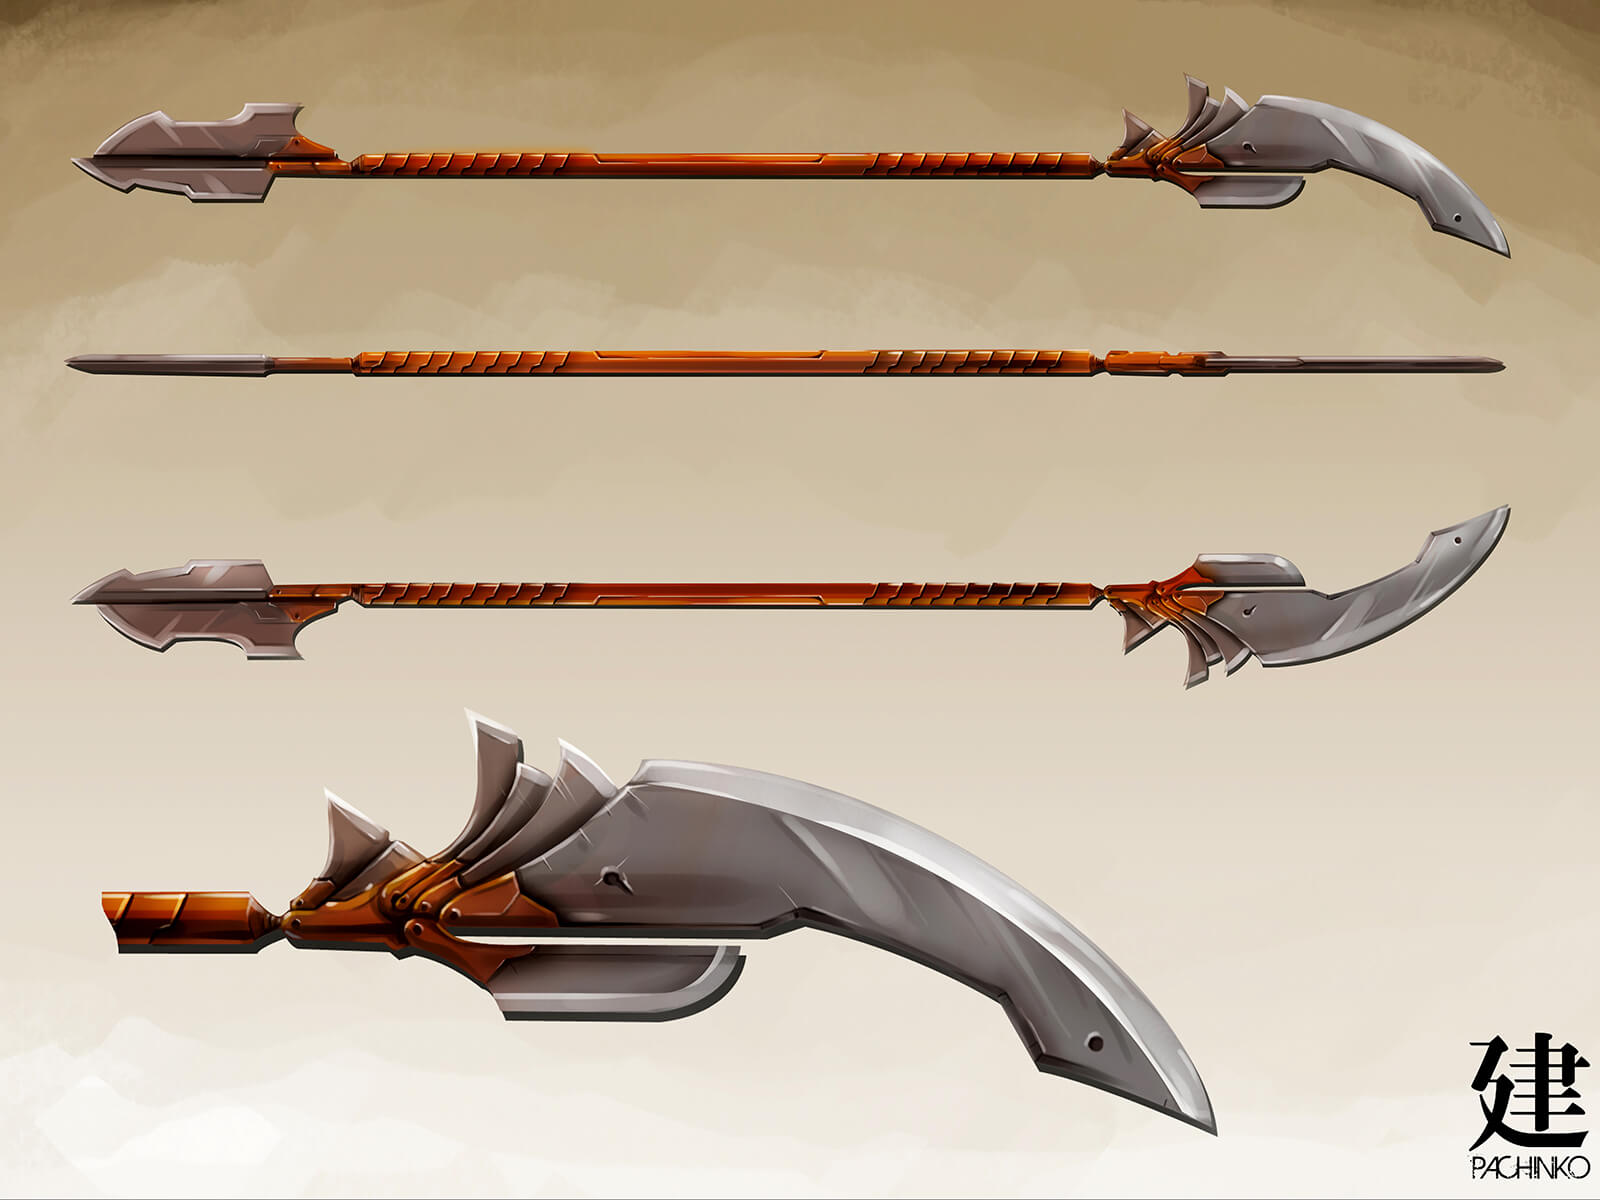 Concept art of a long weapon, bladed at both ends of its orange shaft, seen from different angles